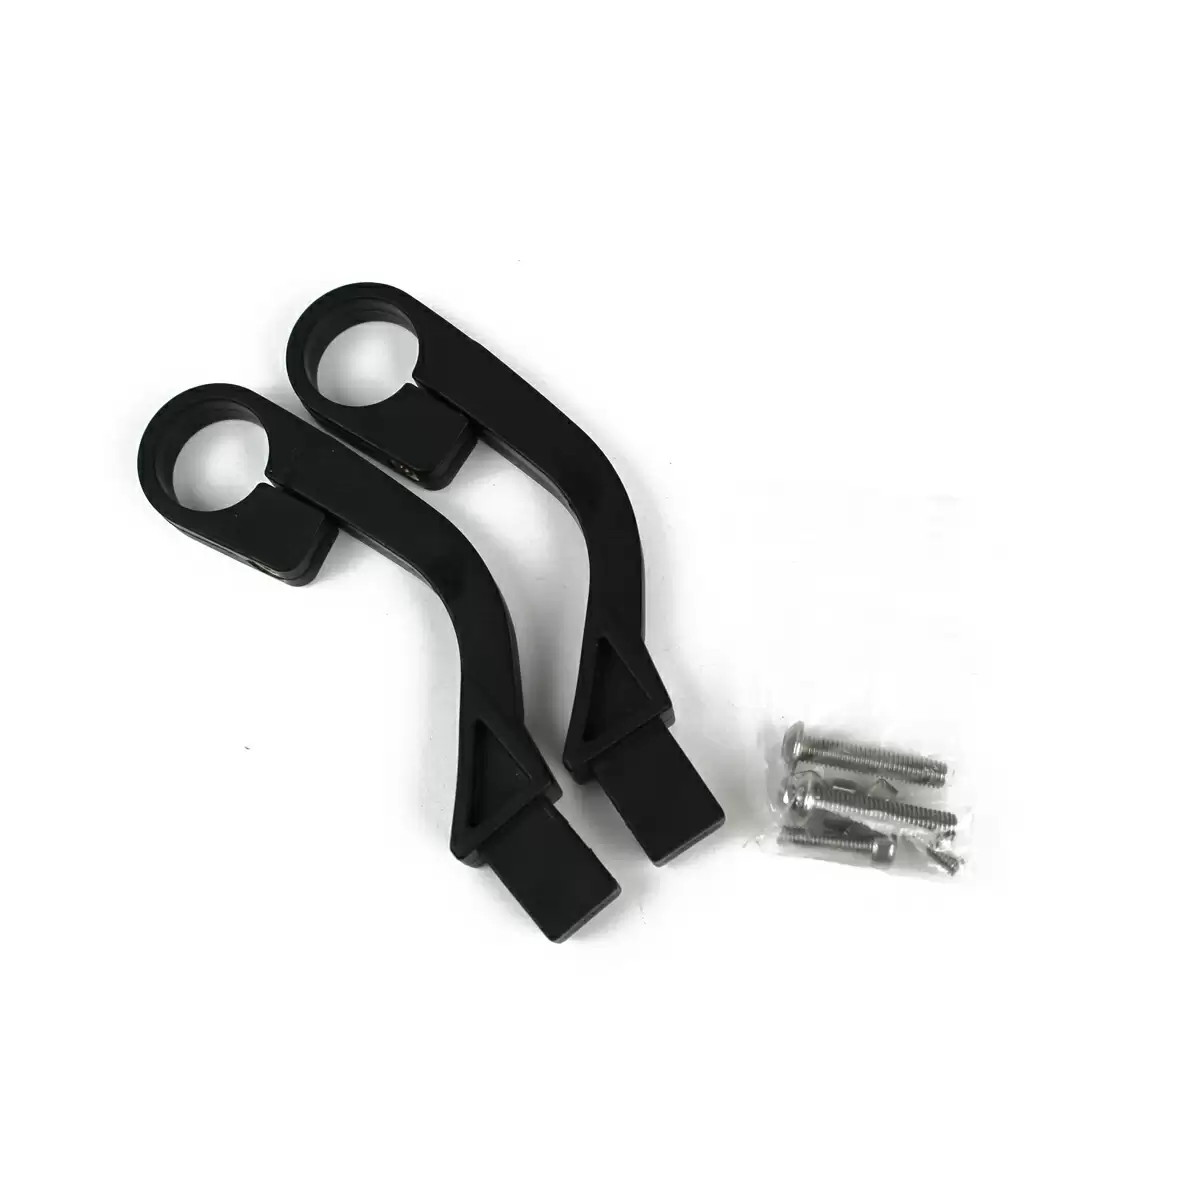 Pair of black spare supports for recchie - image